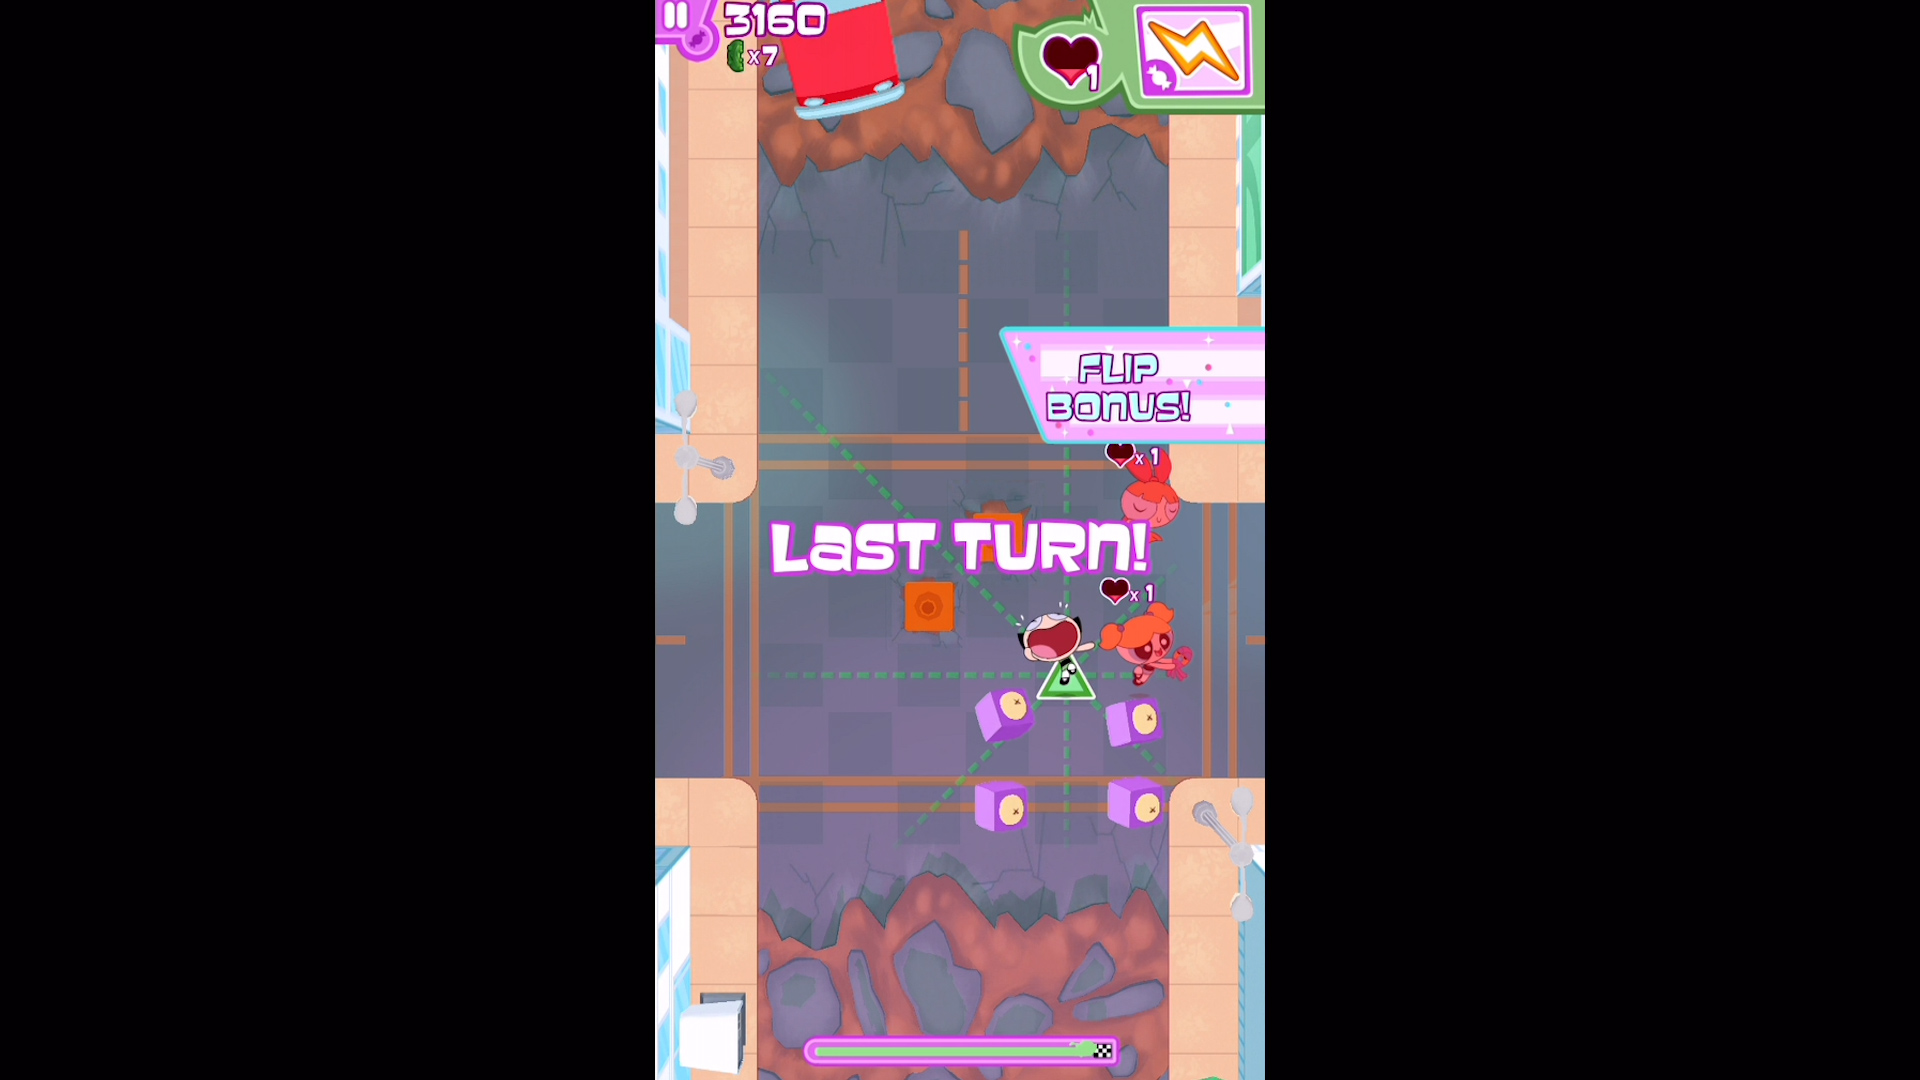 Powerpuff Girls Flipped Out Is Two Different Games, Depending How You Look At It